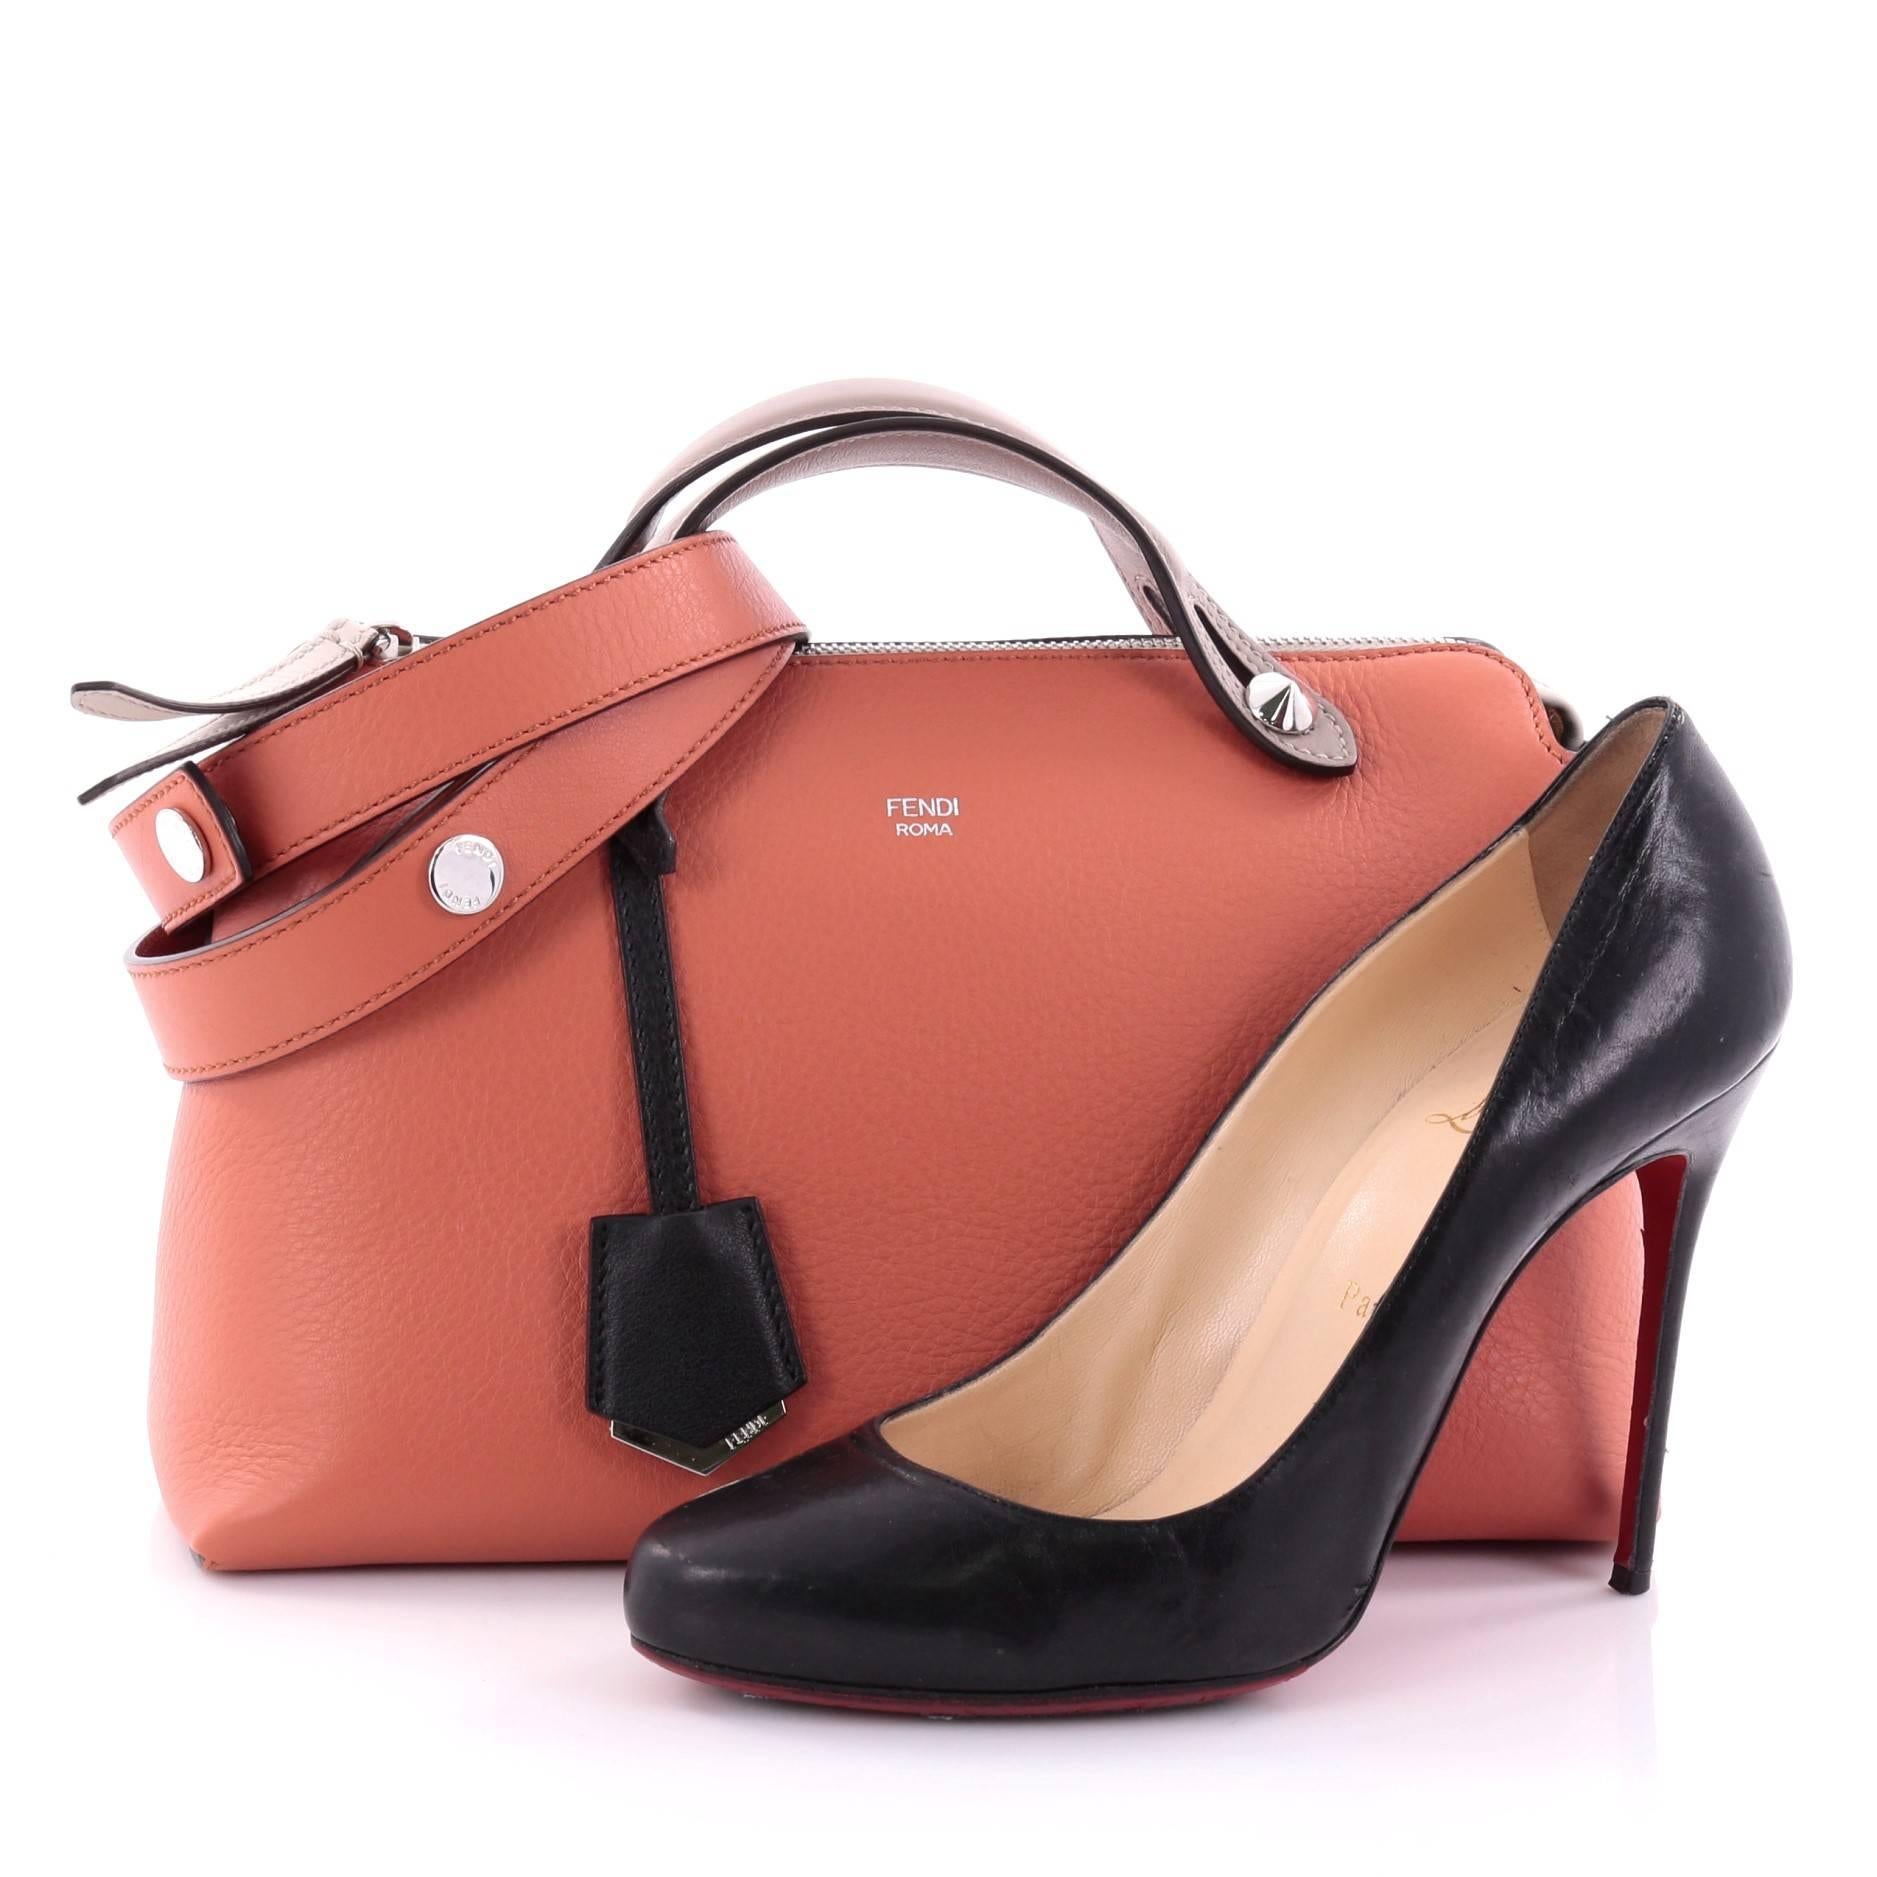 This authentic Fendi By The Way Satchel Calfskin Small showcases a modern understated style admired by every fashionista. Constructed from coral calfskin leather, this minimalist and functional duffle features dual flat leather top handles, stamped